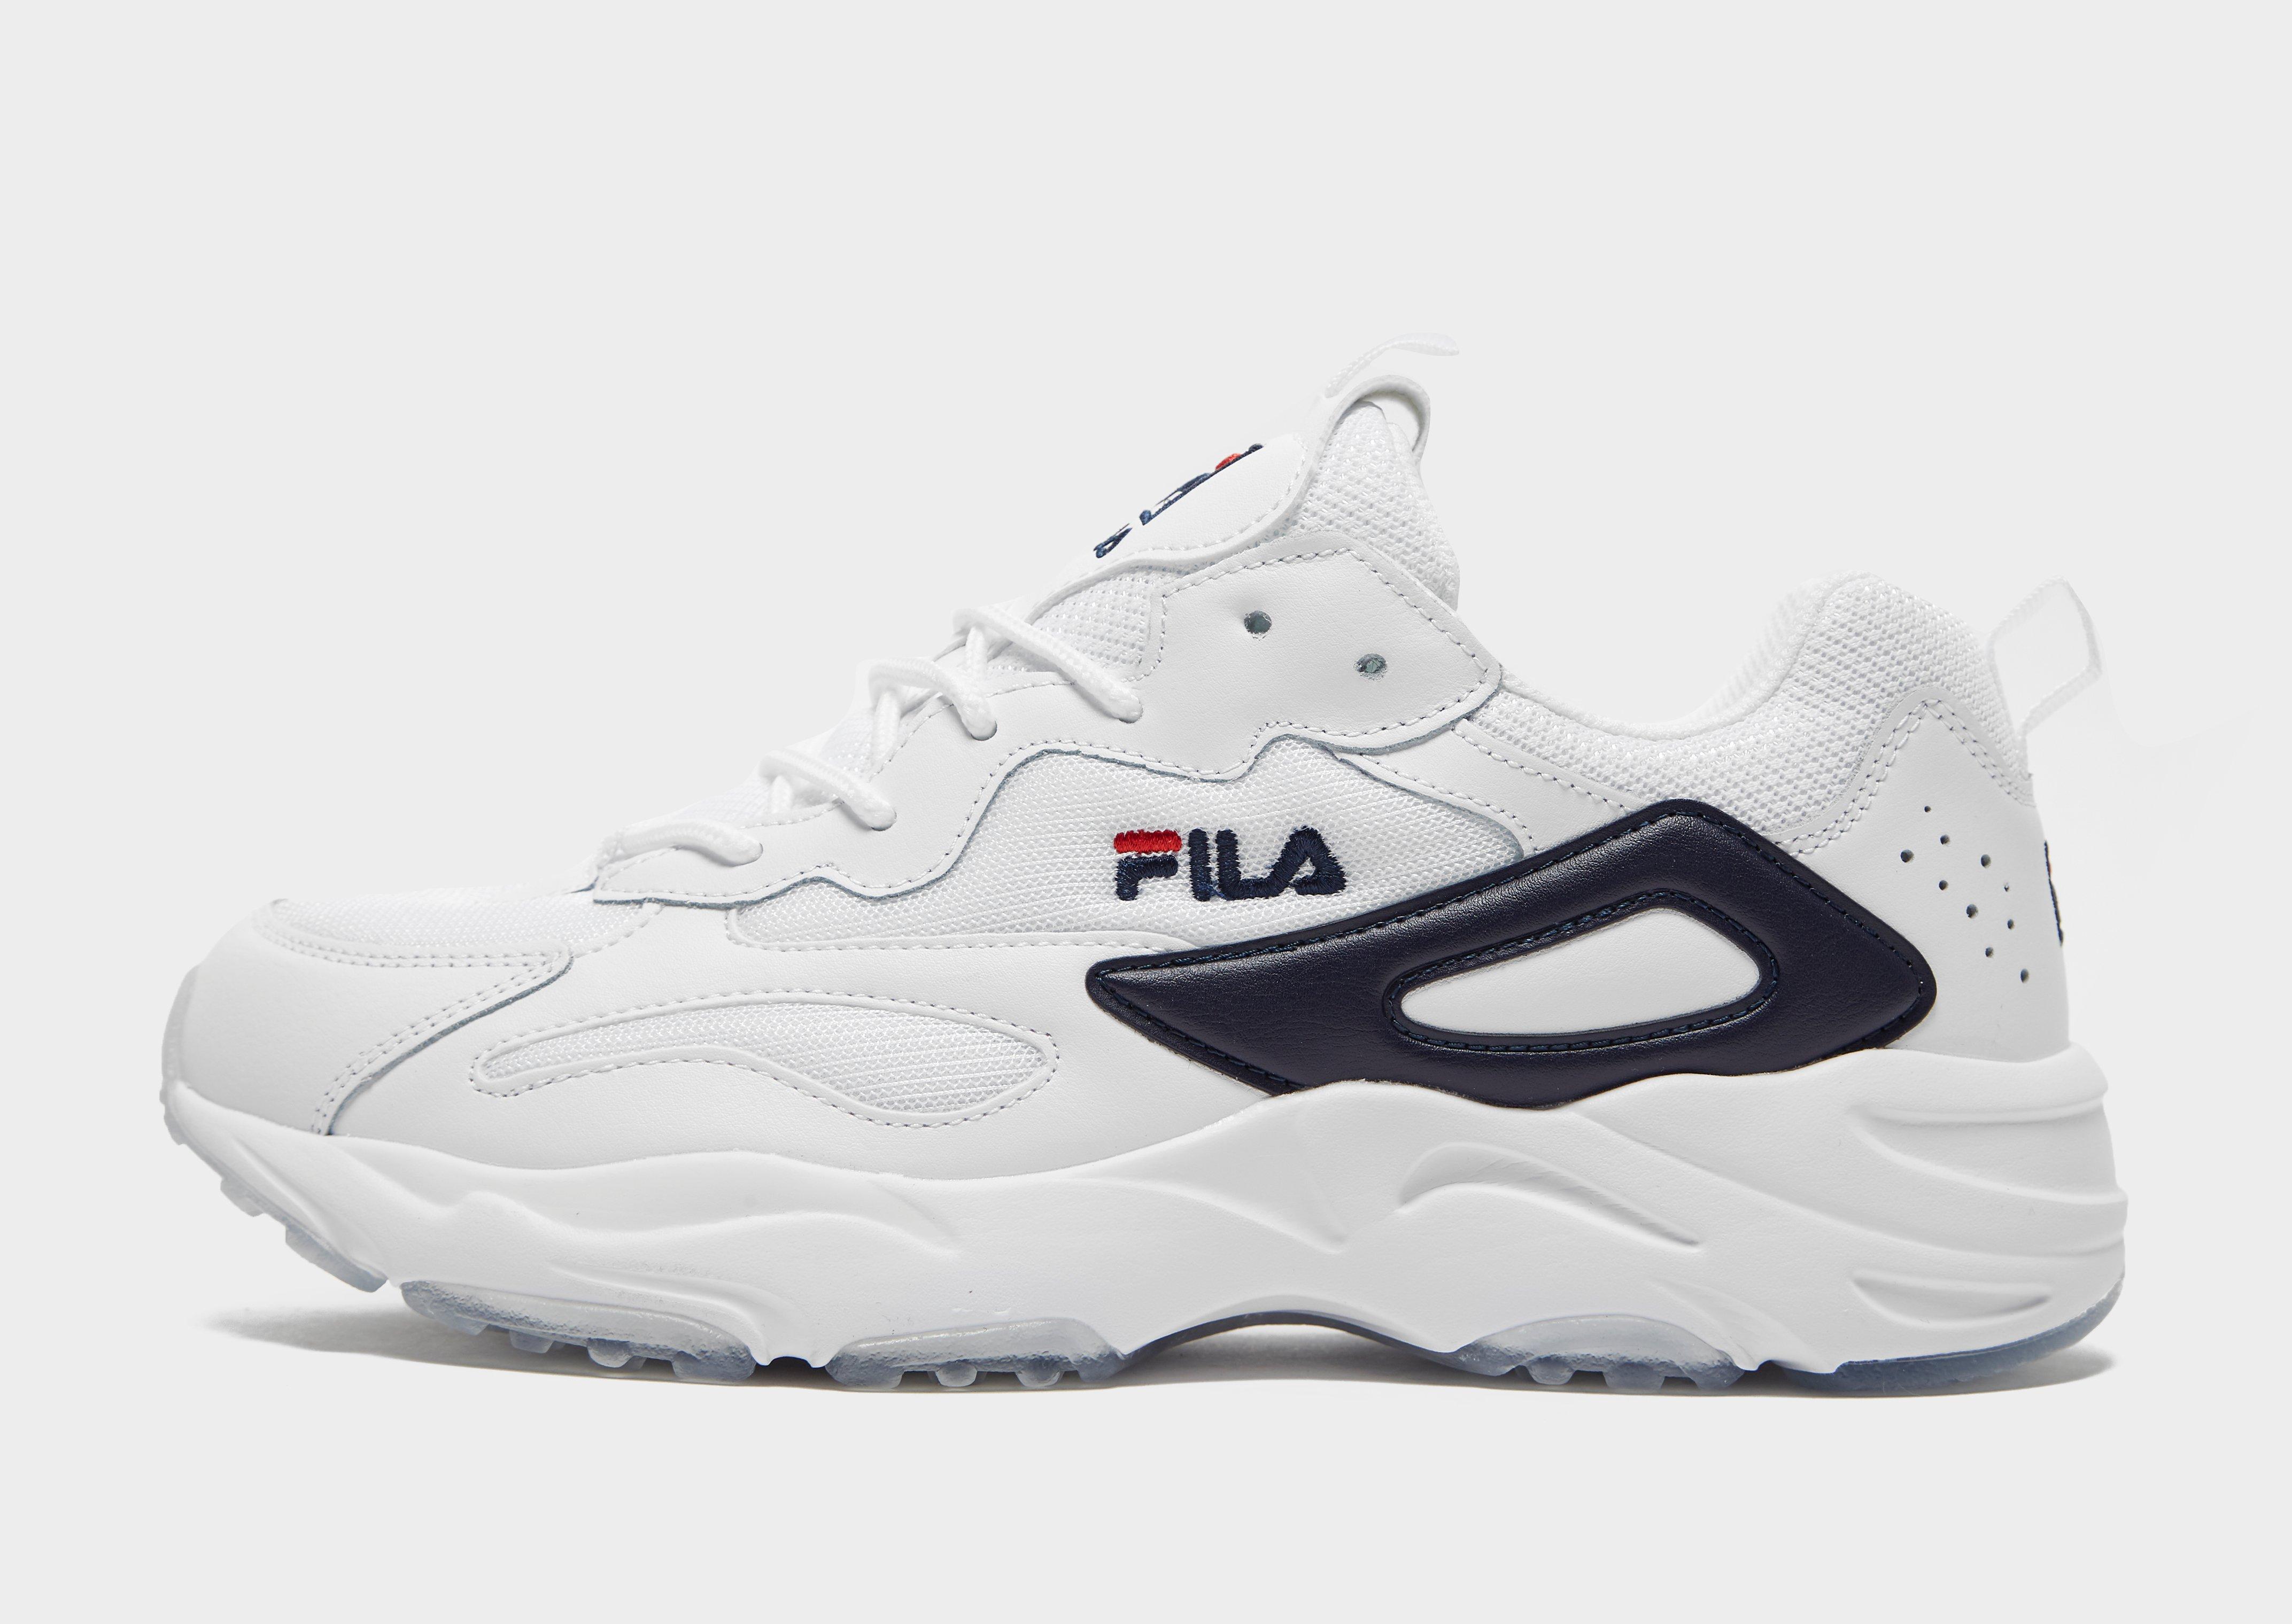 fila ray homme gris